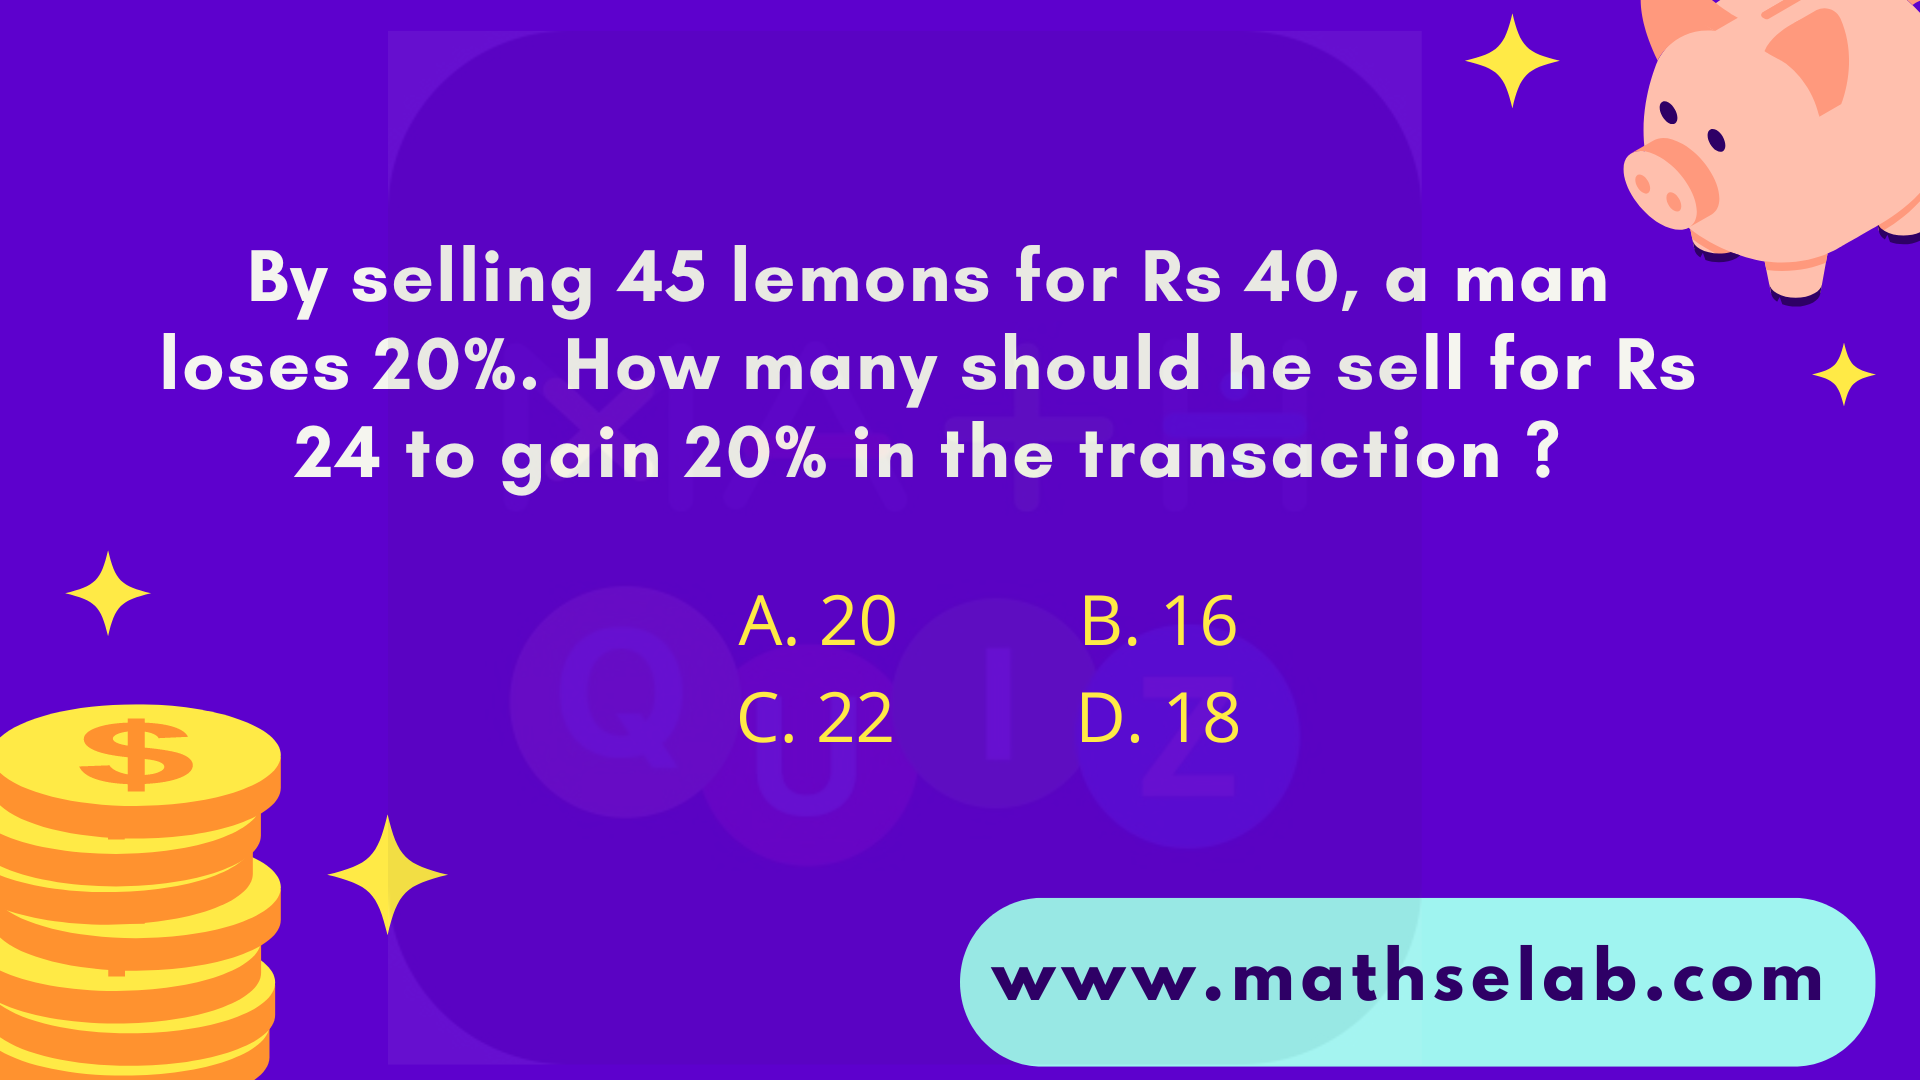 By selling 45 lemons for Rs 40, a man loses 20%. How many should he sell for Rs 24 to gain 20% in the transaction - www.mathselab.com